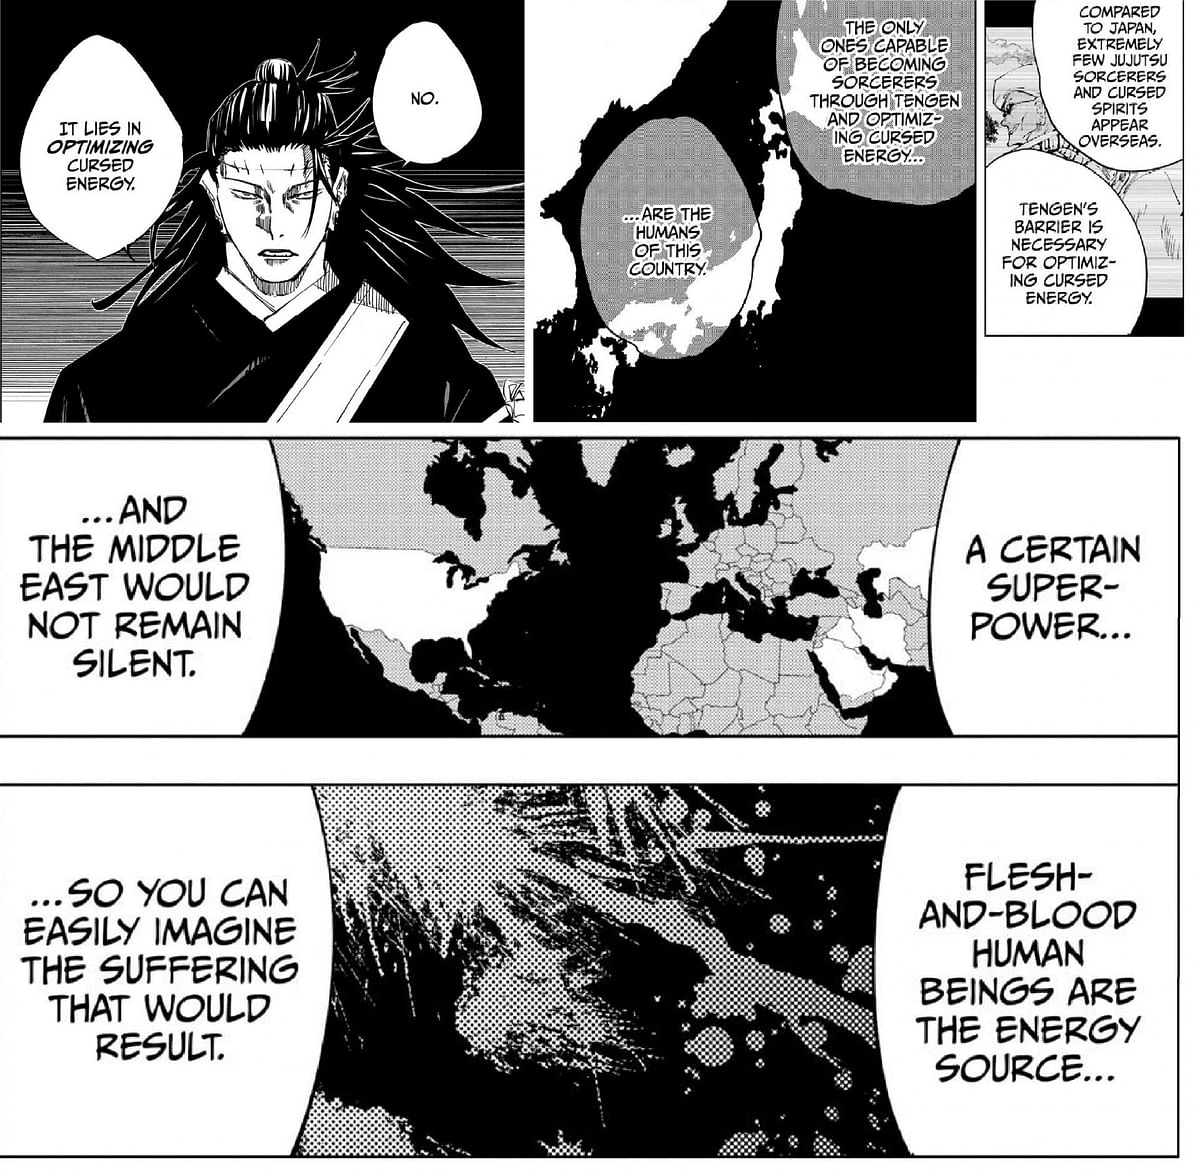 Jujutsu Kaisen What Is Cursed Energy Explained 0938